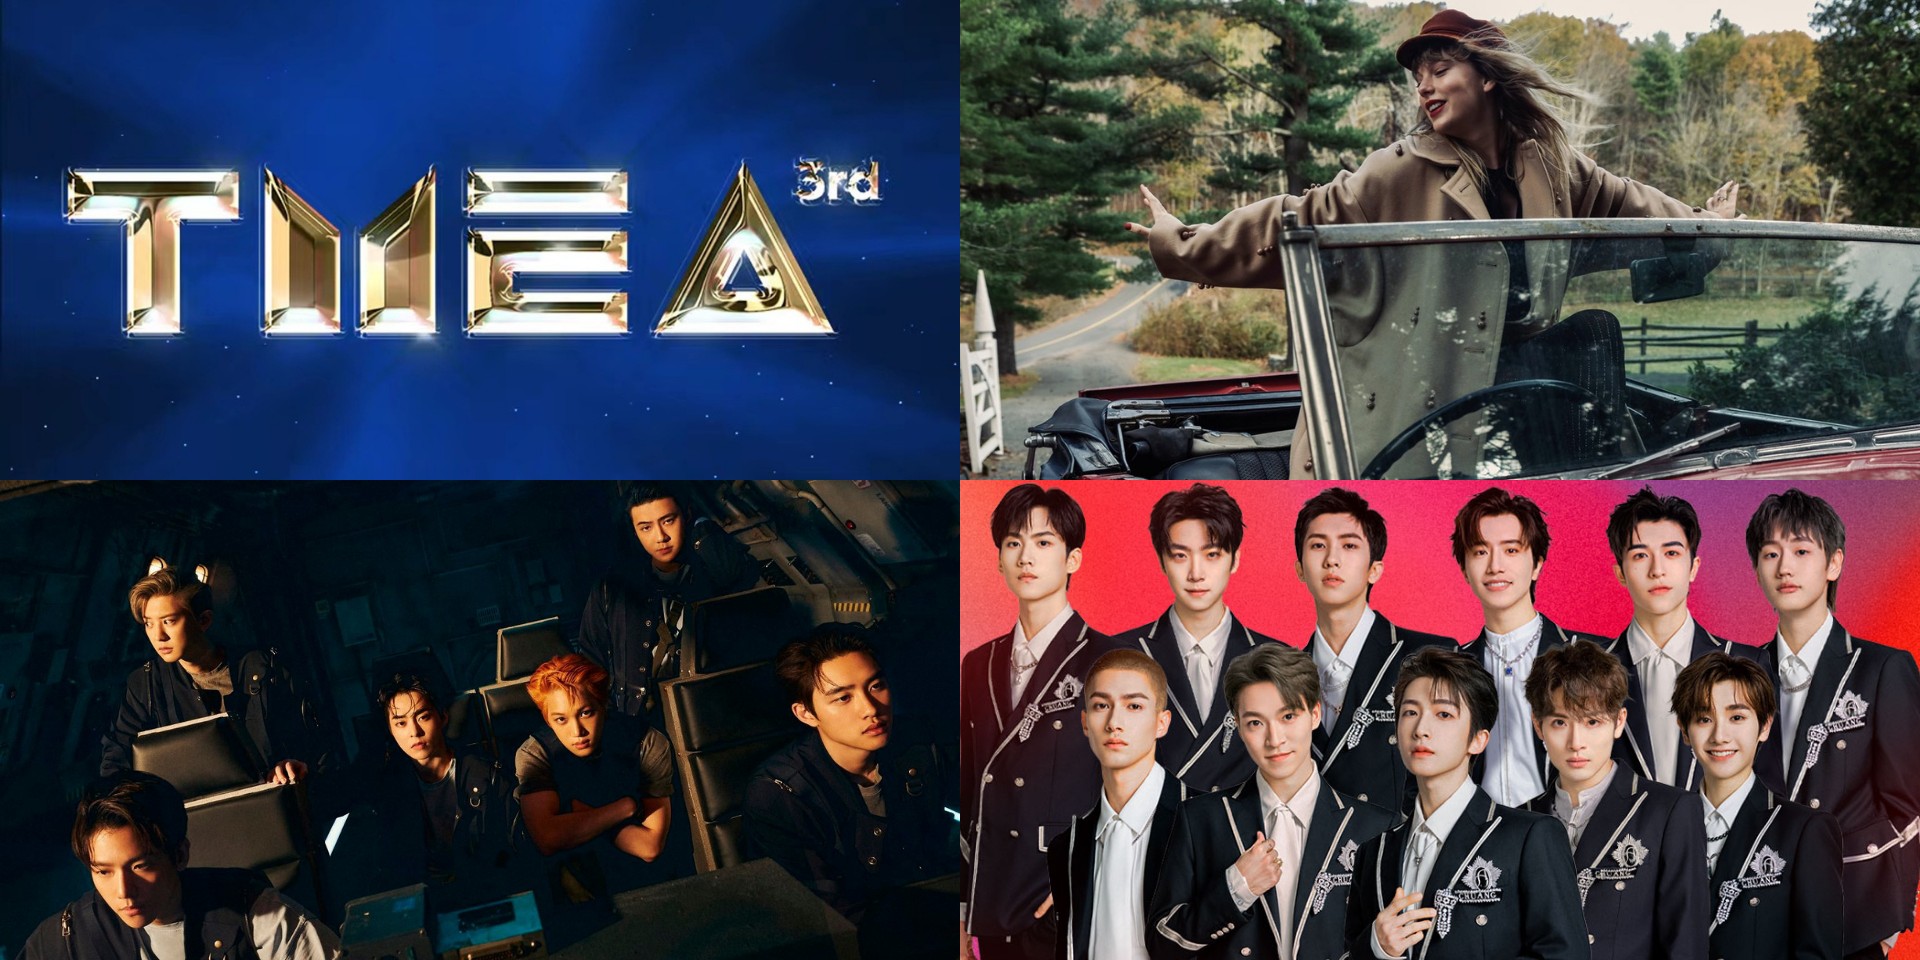 Taylor Swift, EXO, INTO1 win at the 3rd Tencent Music Entertainment Awards 